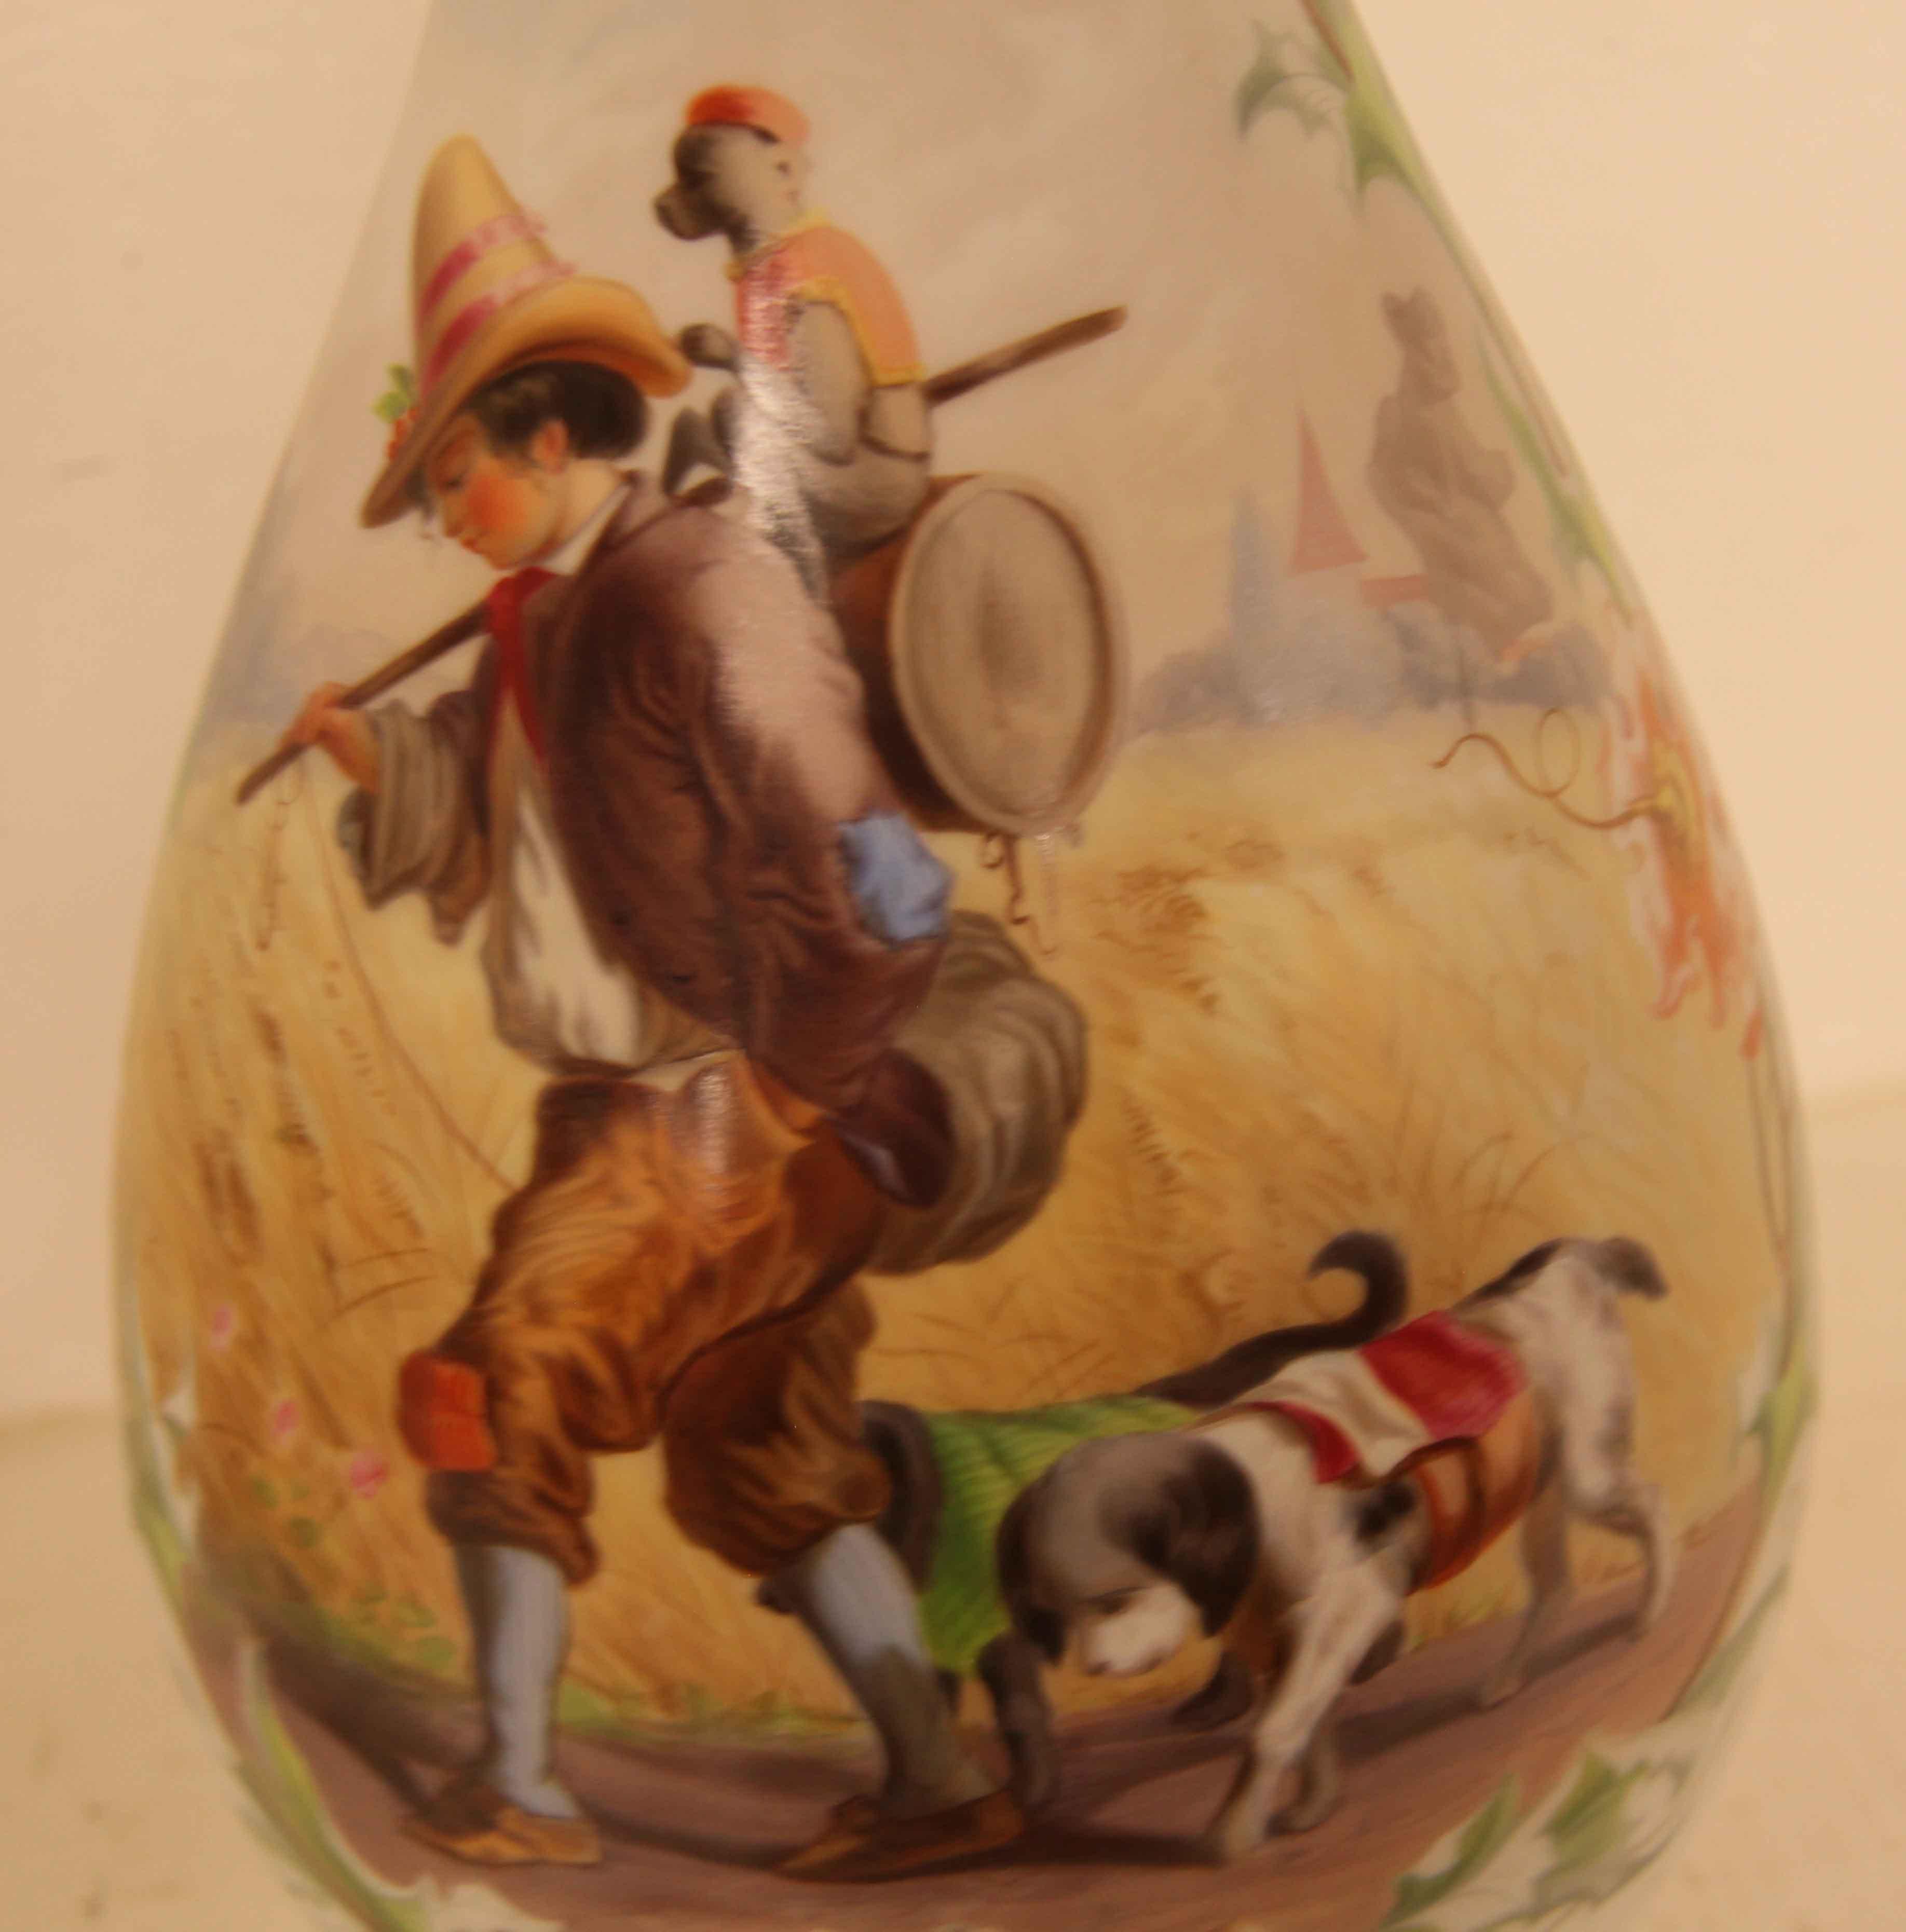 Pair of French tall glass vases,  each rim is gilded, one vase depicts a young boy and his dogs with a monkey on his back walking along an open trail, he has a stick in one hand and the other is in his pocket; the monkey appears to be sitting on a